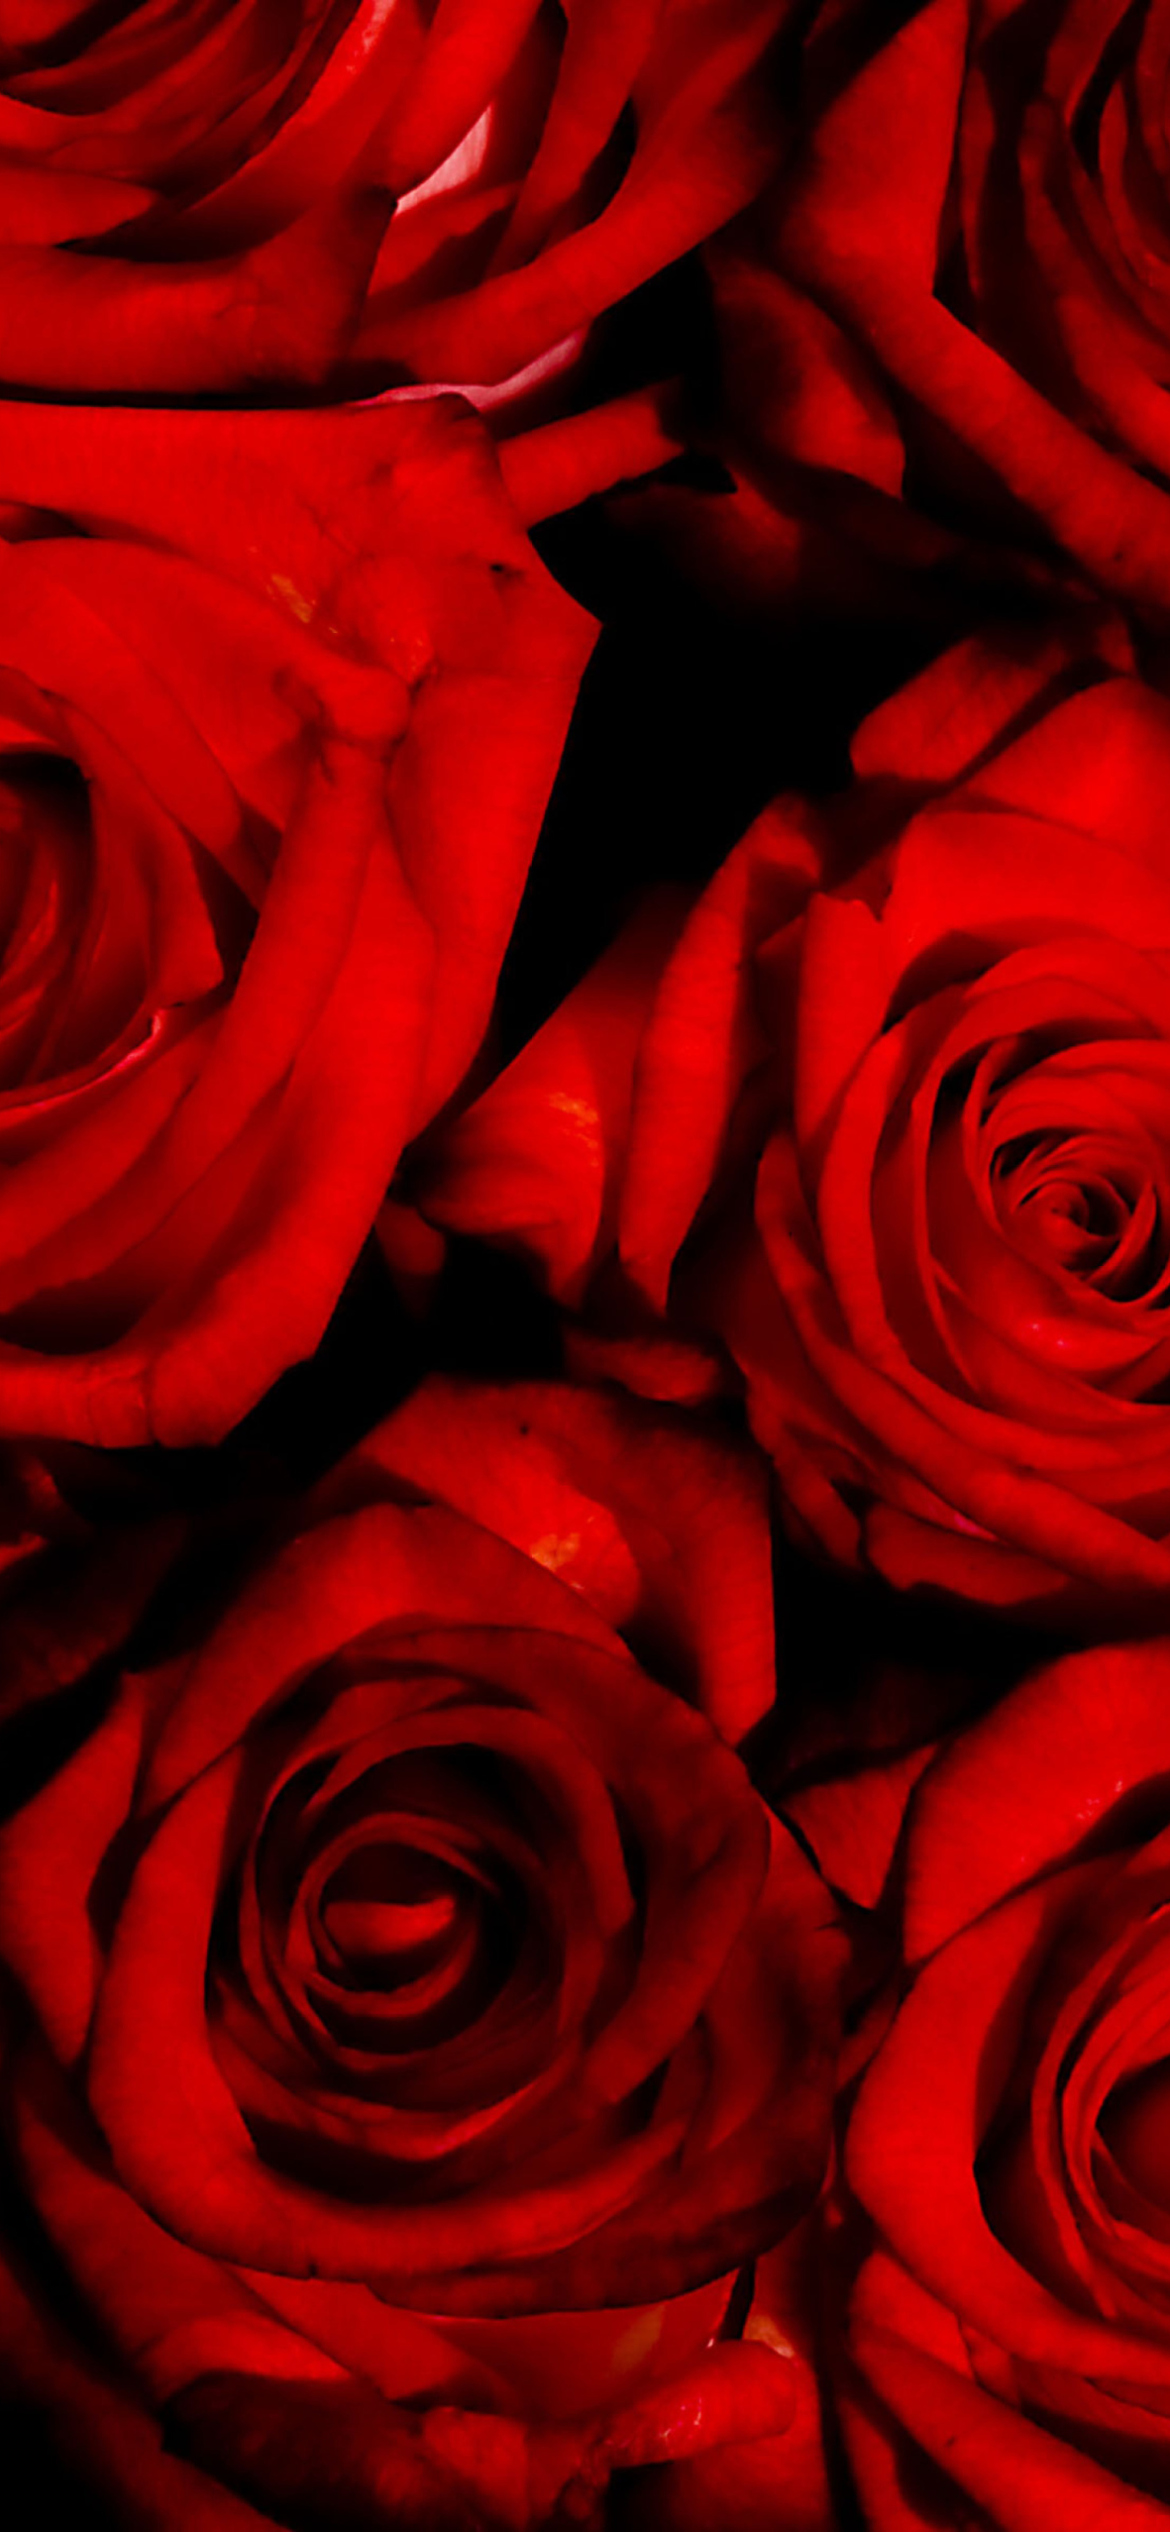 Red Flowers Of Love wallpaper 1170x2532